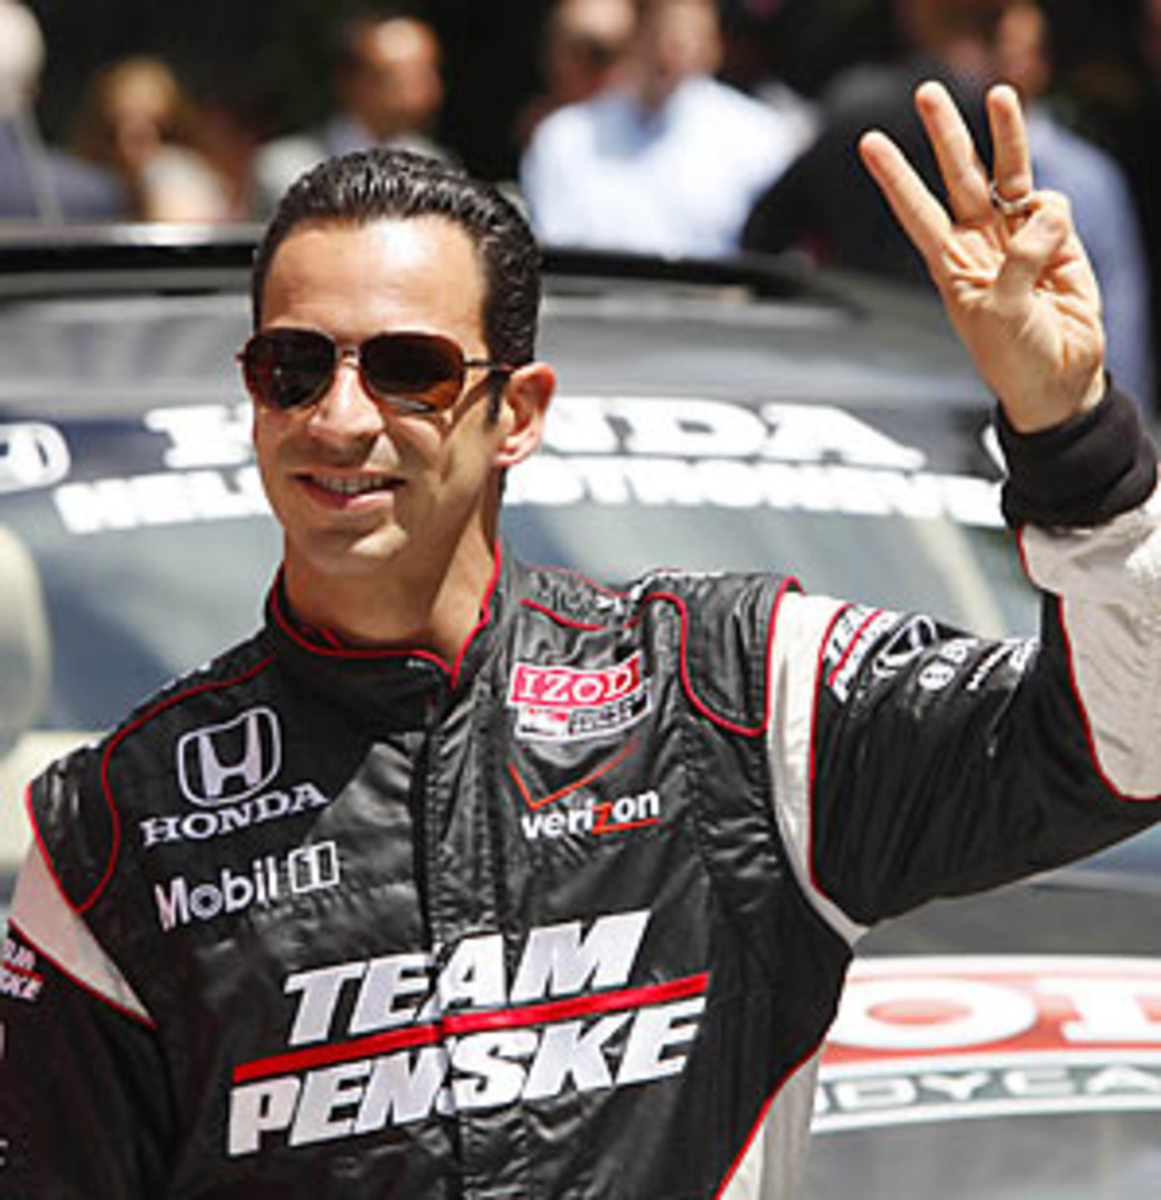 Helio Castroneves will make his 148th start in the IZOD IndyCar Series in t...